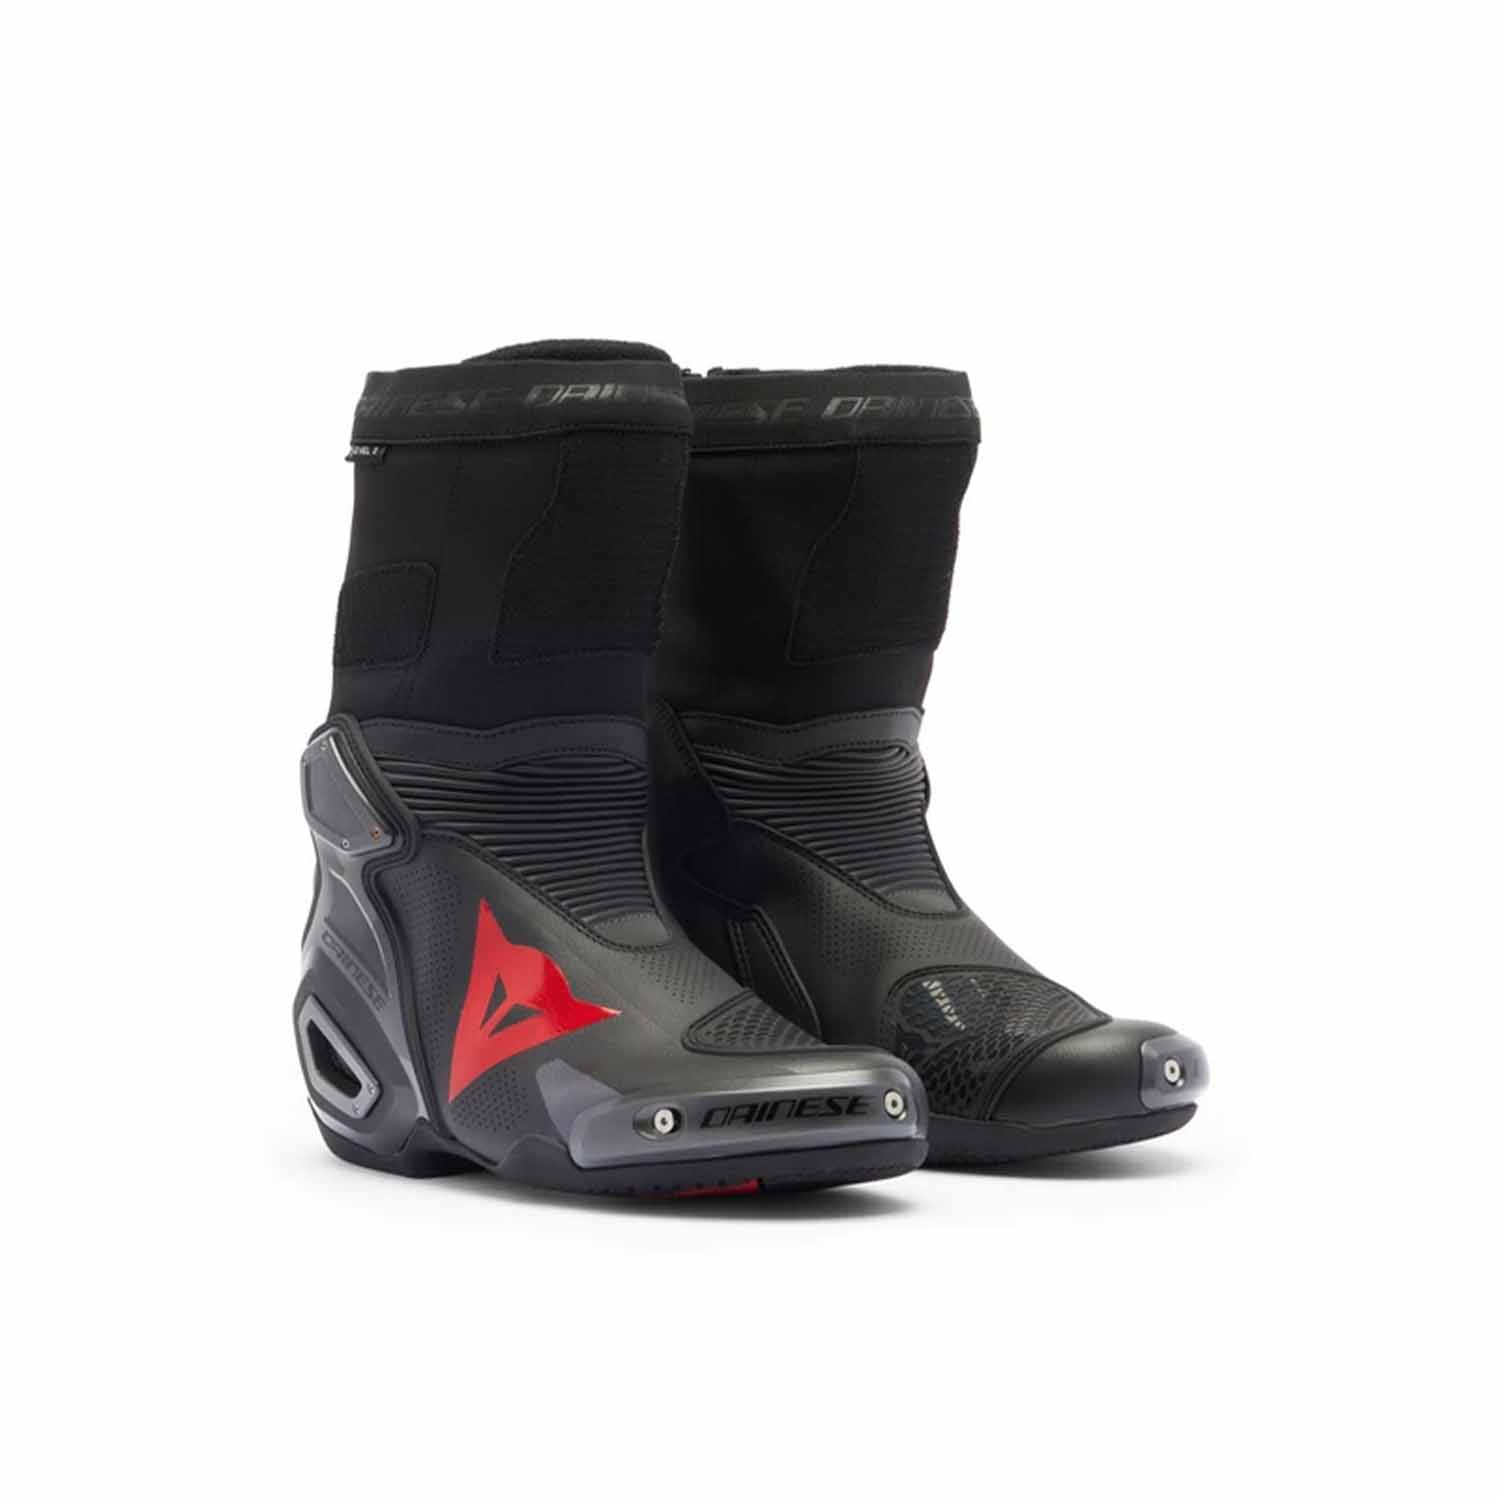 Image of Dainese Axial 2 Air Boots Black Black Red Fluo Taille 41